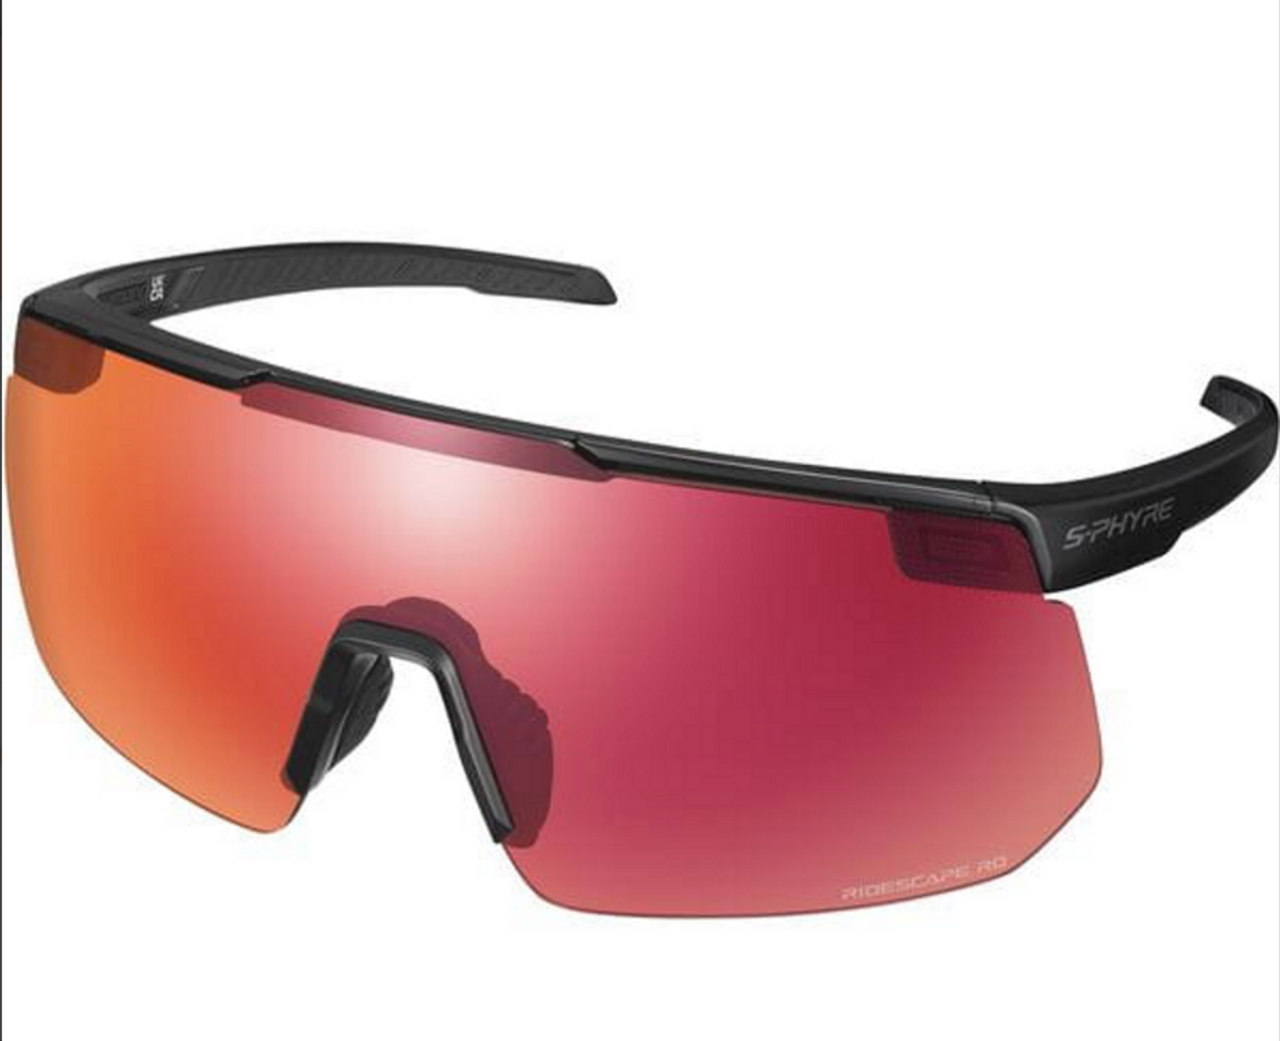 Shimano S-PHYRE RideScape Road Lens Full UV400 Protection Sunglasses RRP £199.99